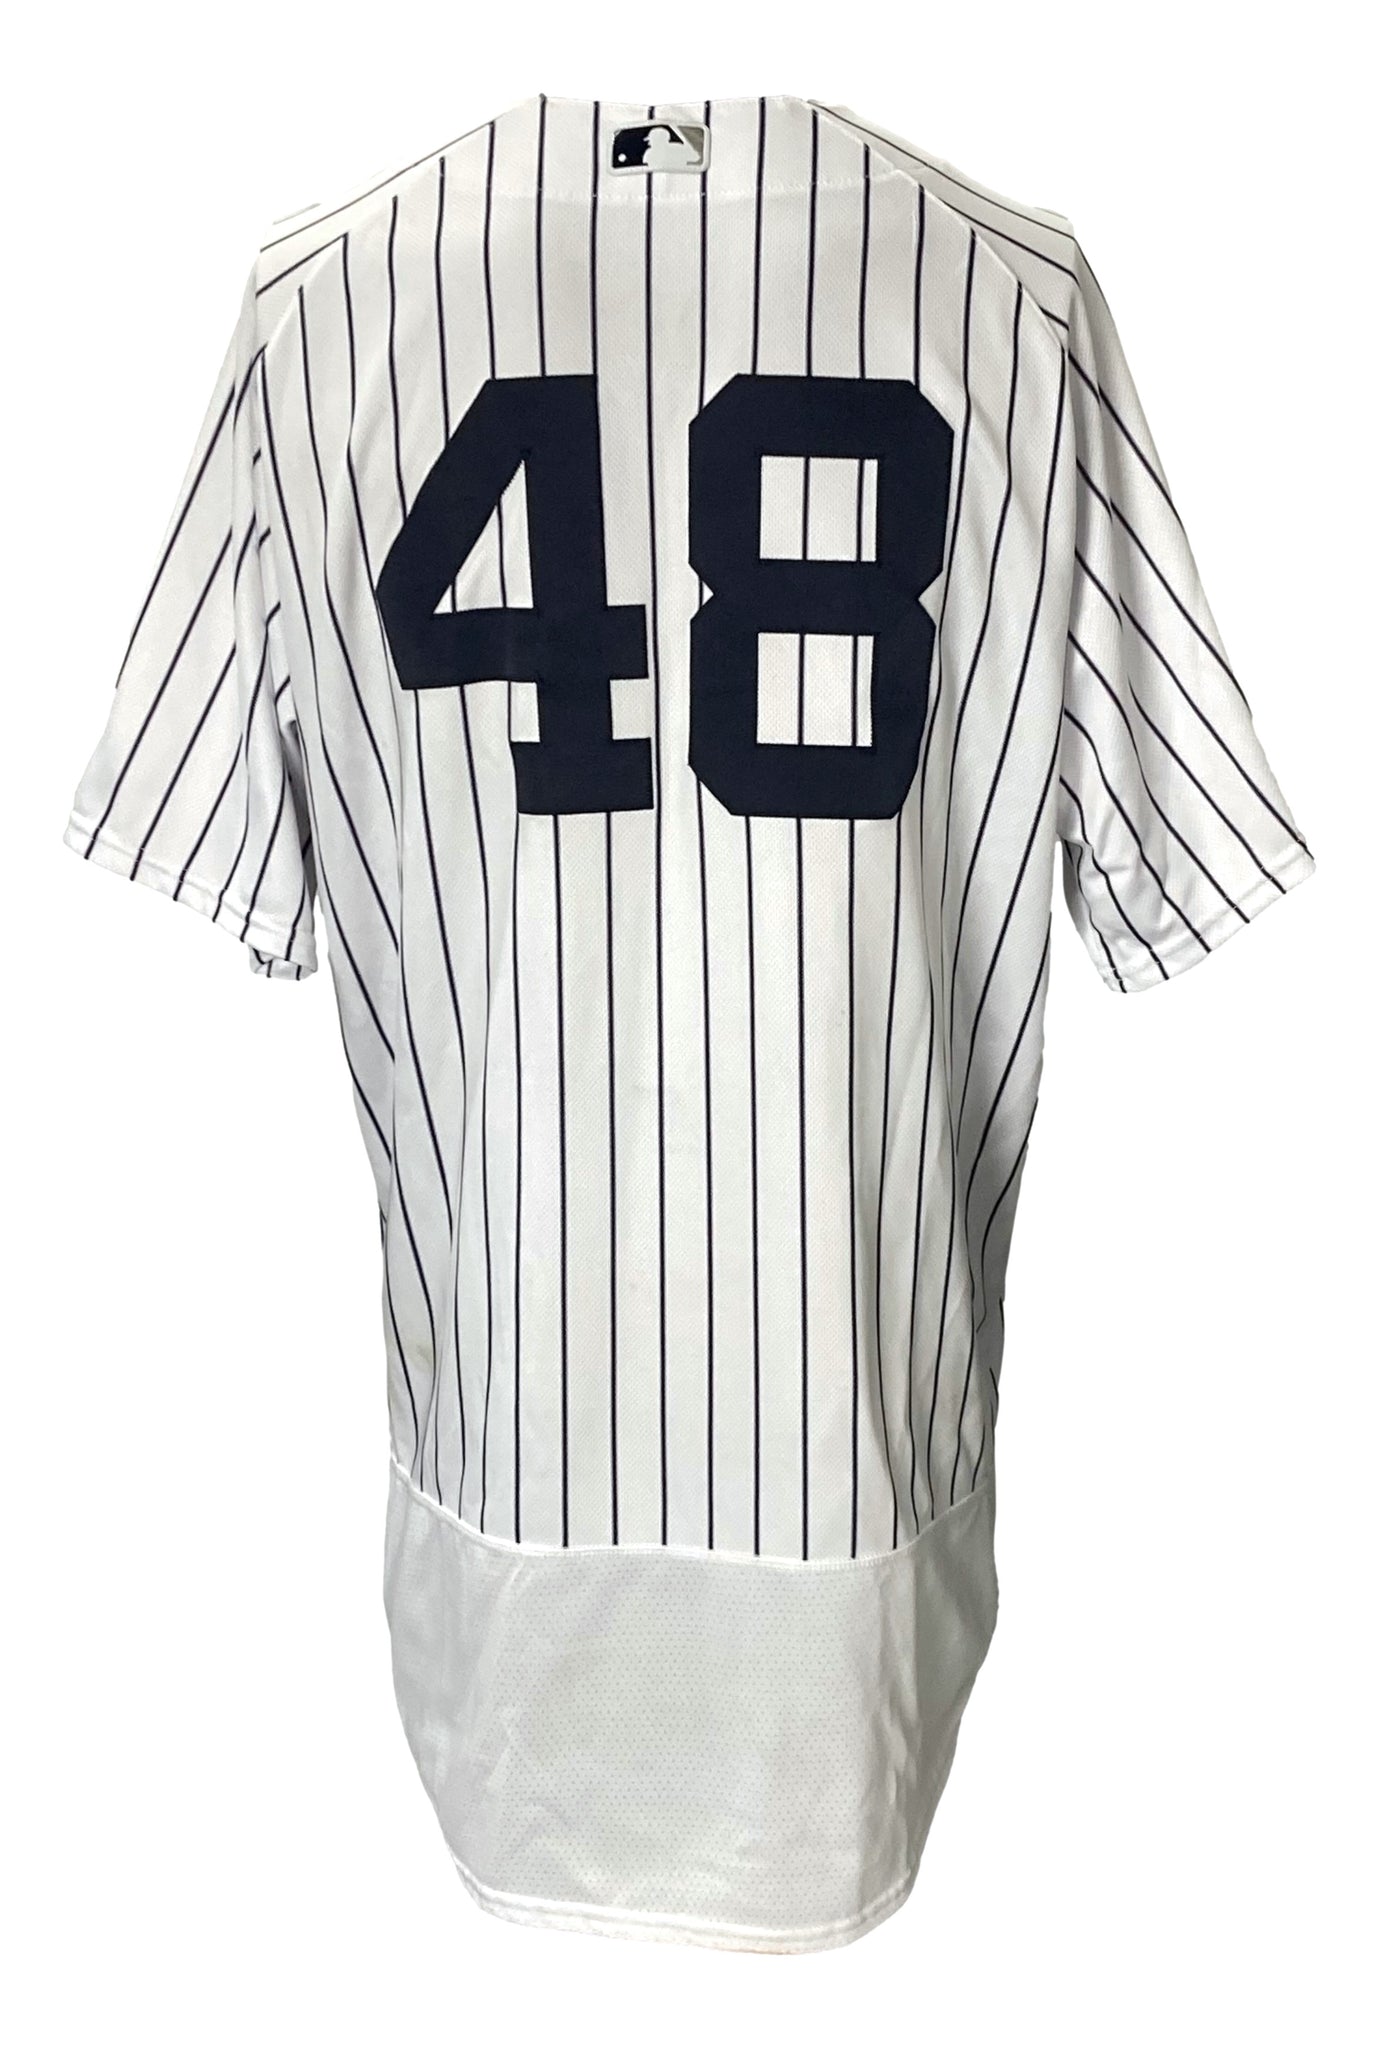 mlb game used jersey yankees